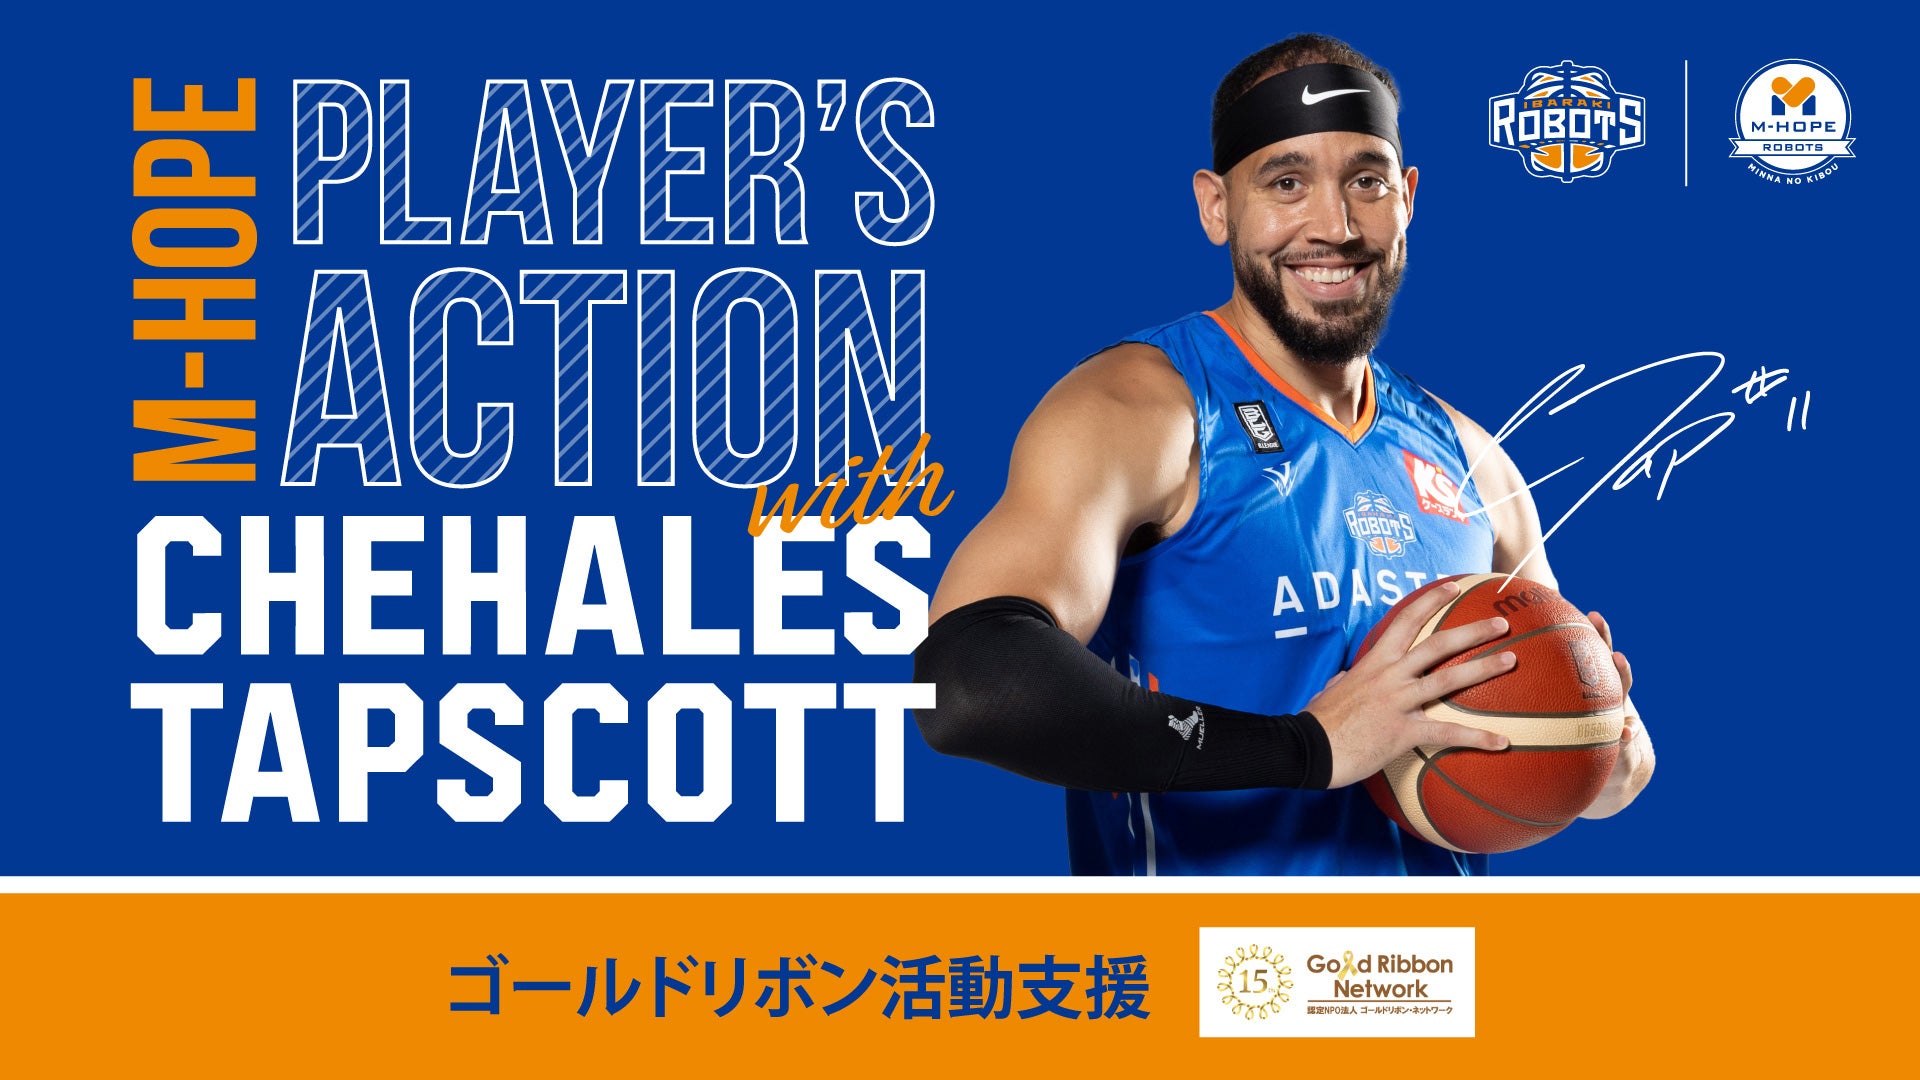 M-HOPE Player’s Action with シェイ